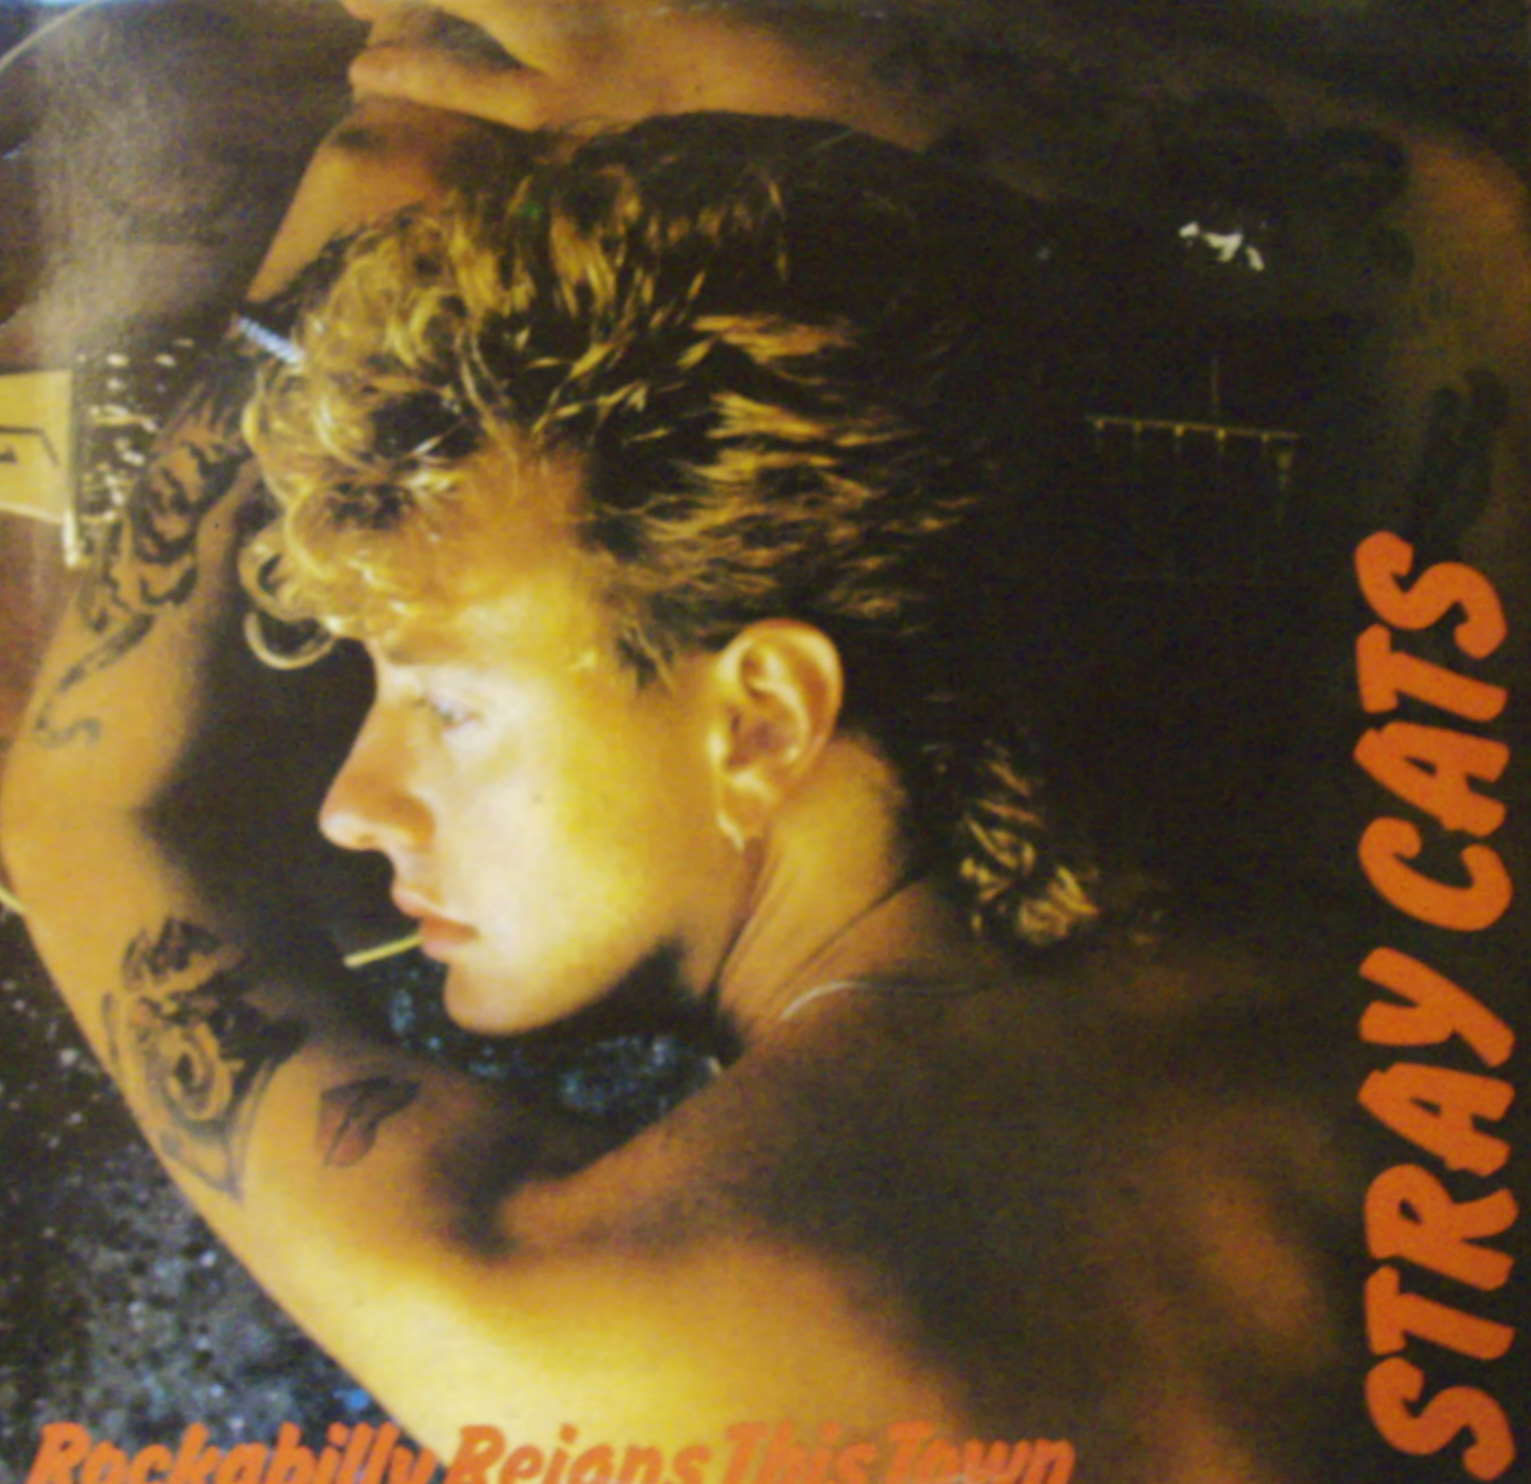 Stray Cats / Rockabilly Reigns This Town